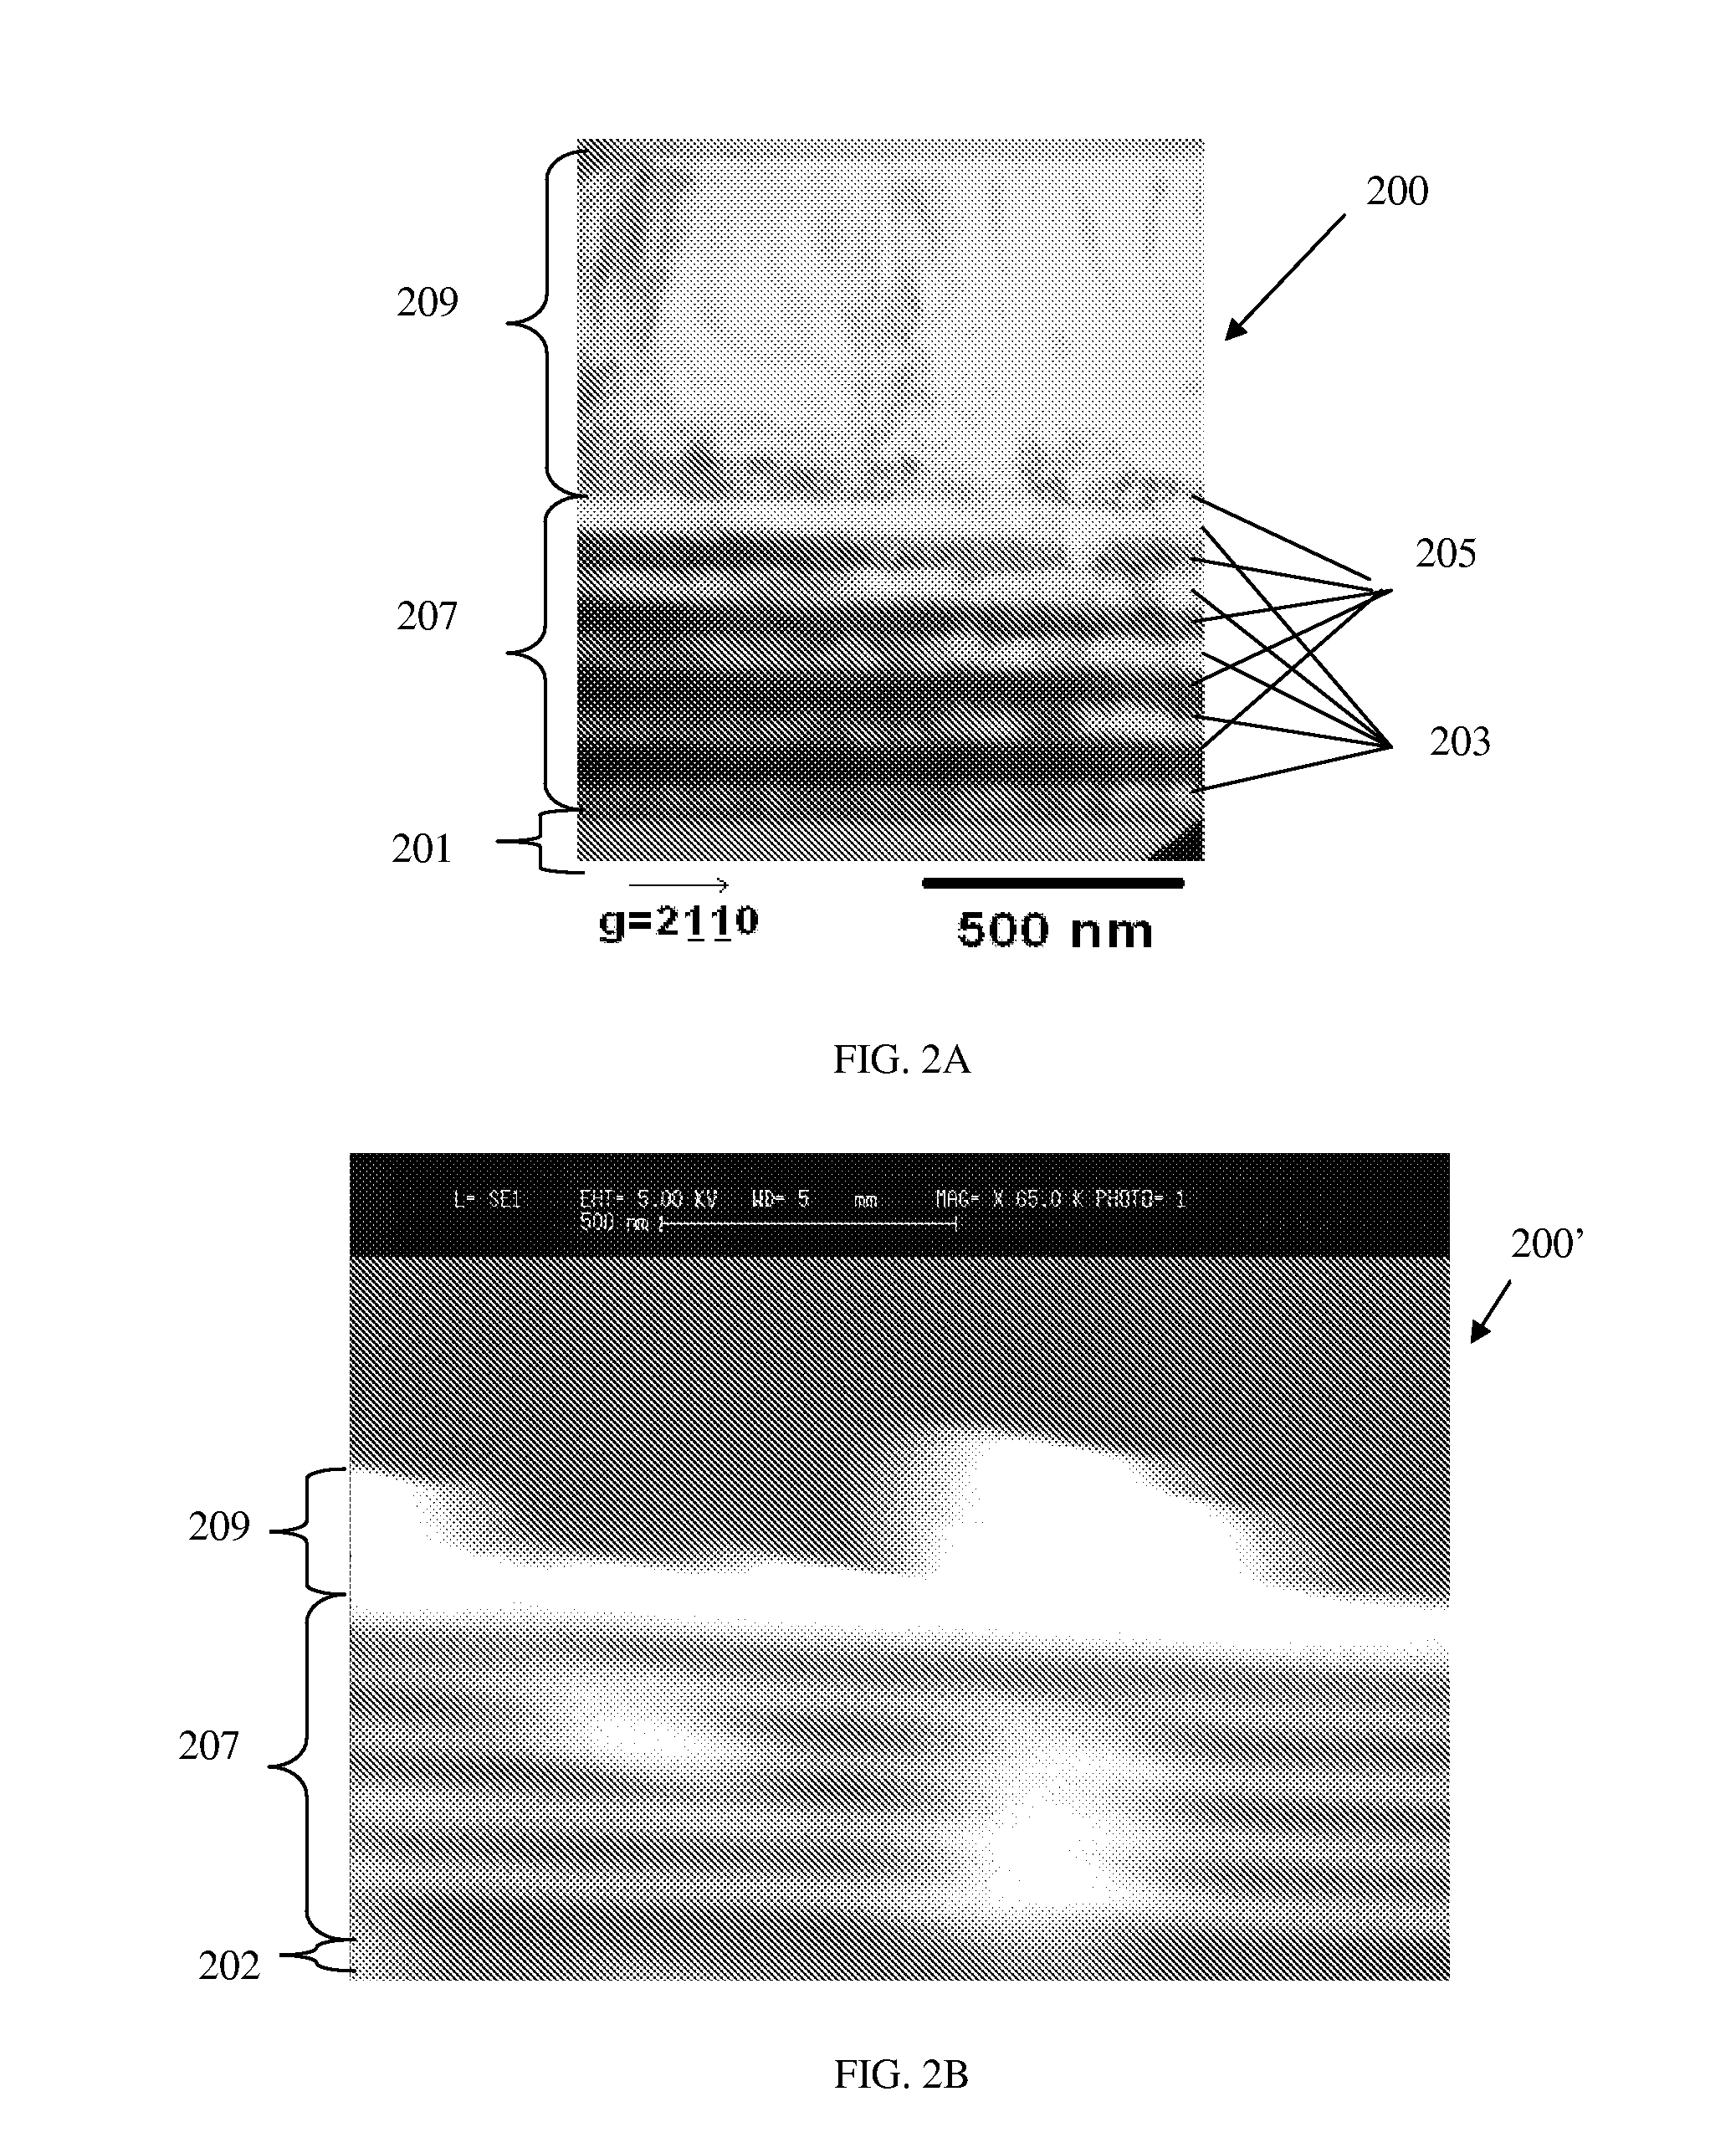 Group iii-nitride growth on silicon or silicon germanium substrates and method and devices therefor